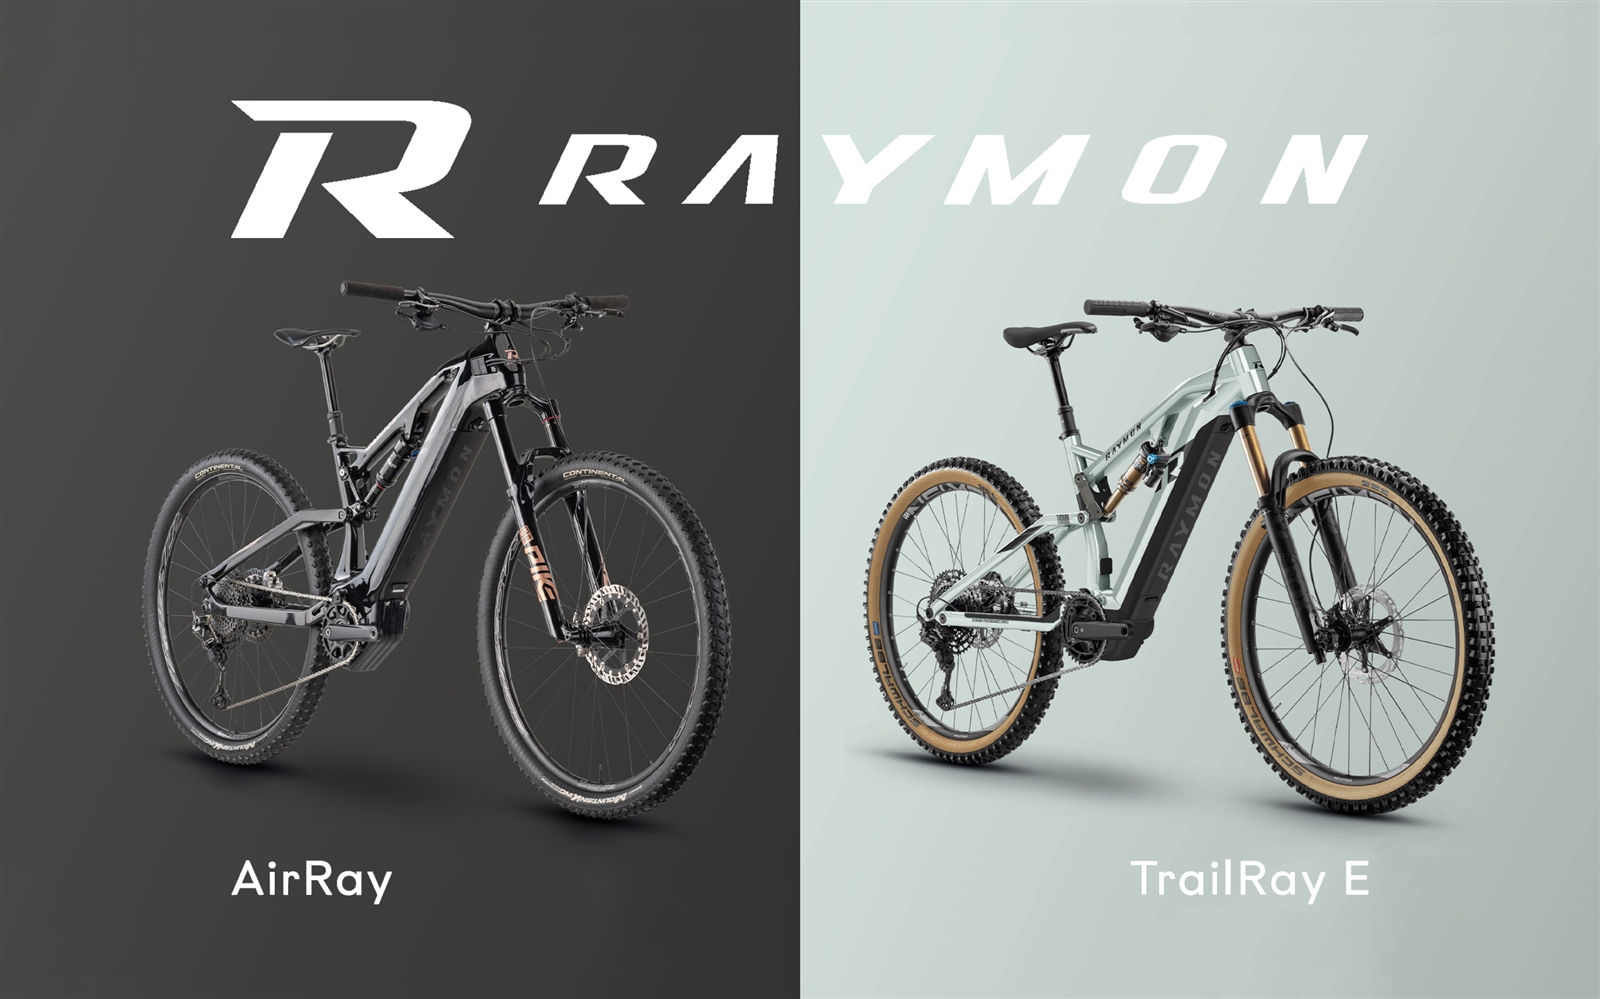 Preview New R Raymon Models 2022 - AirRay and TrailRay